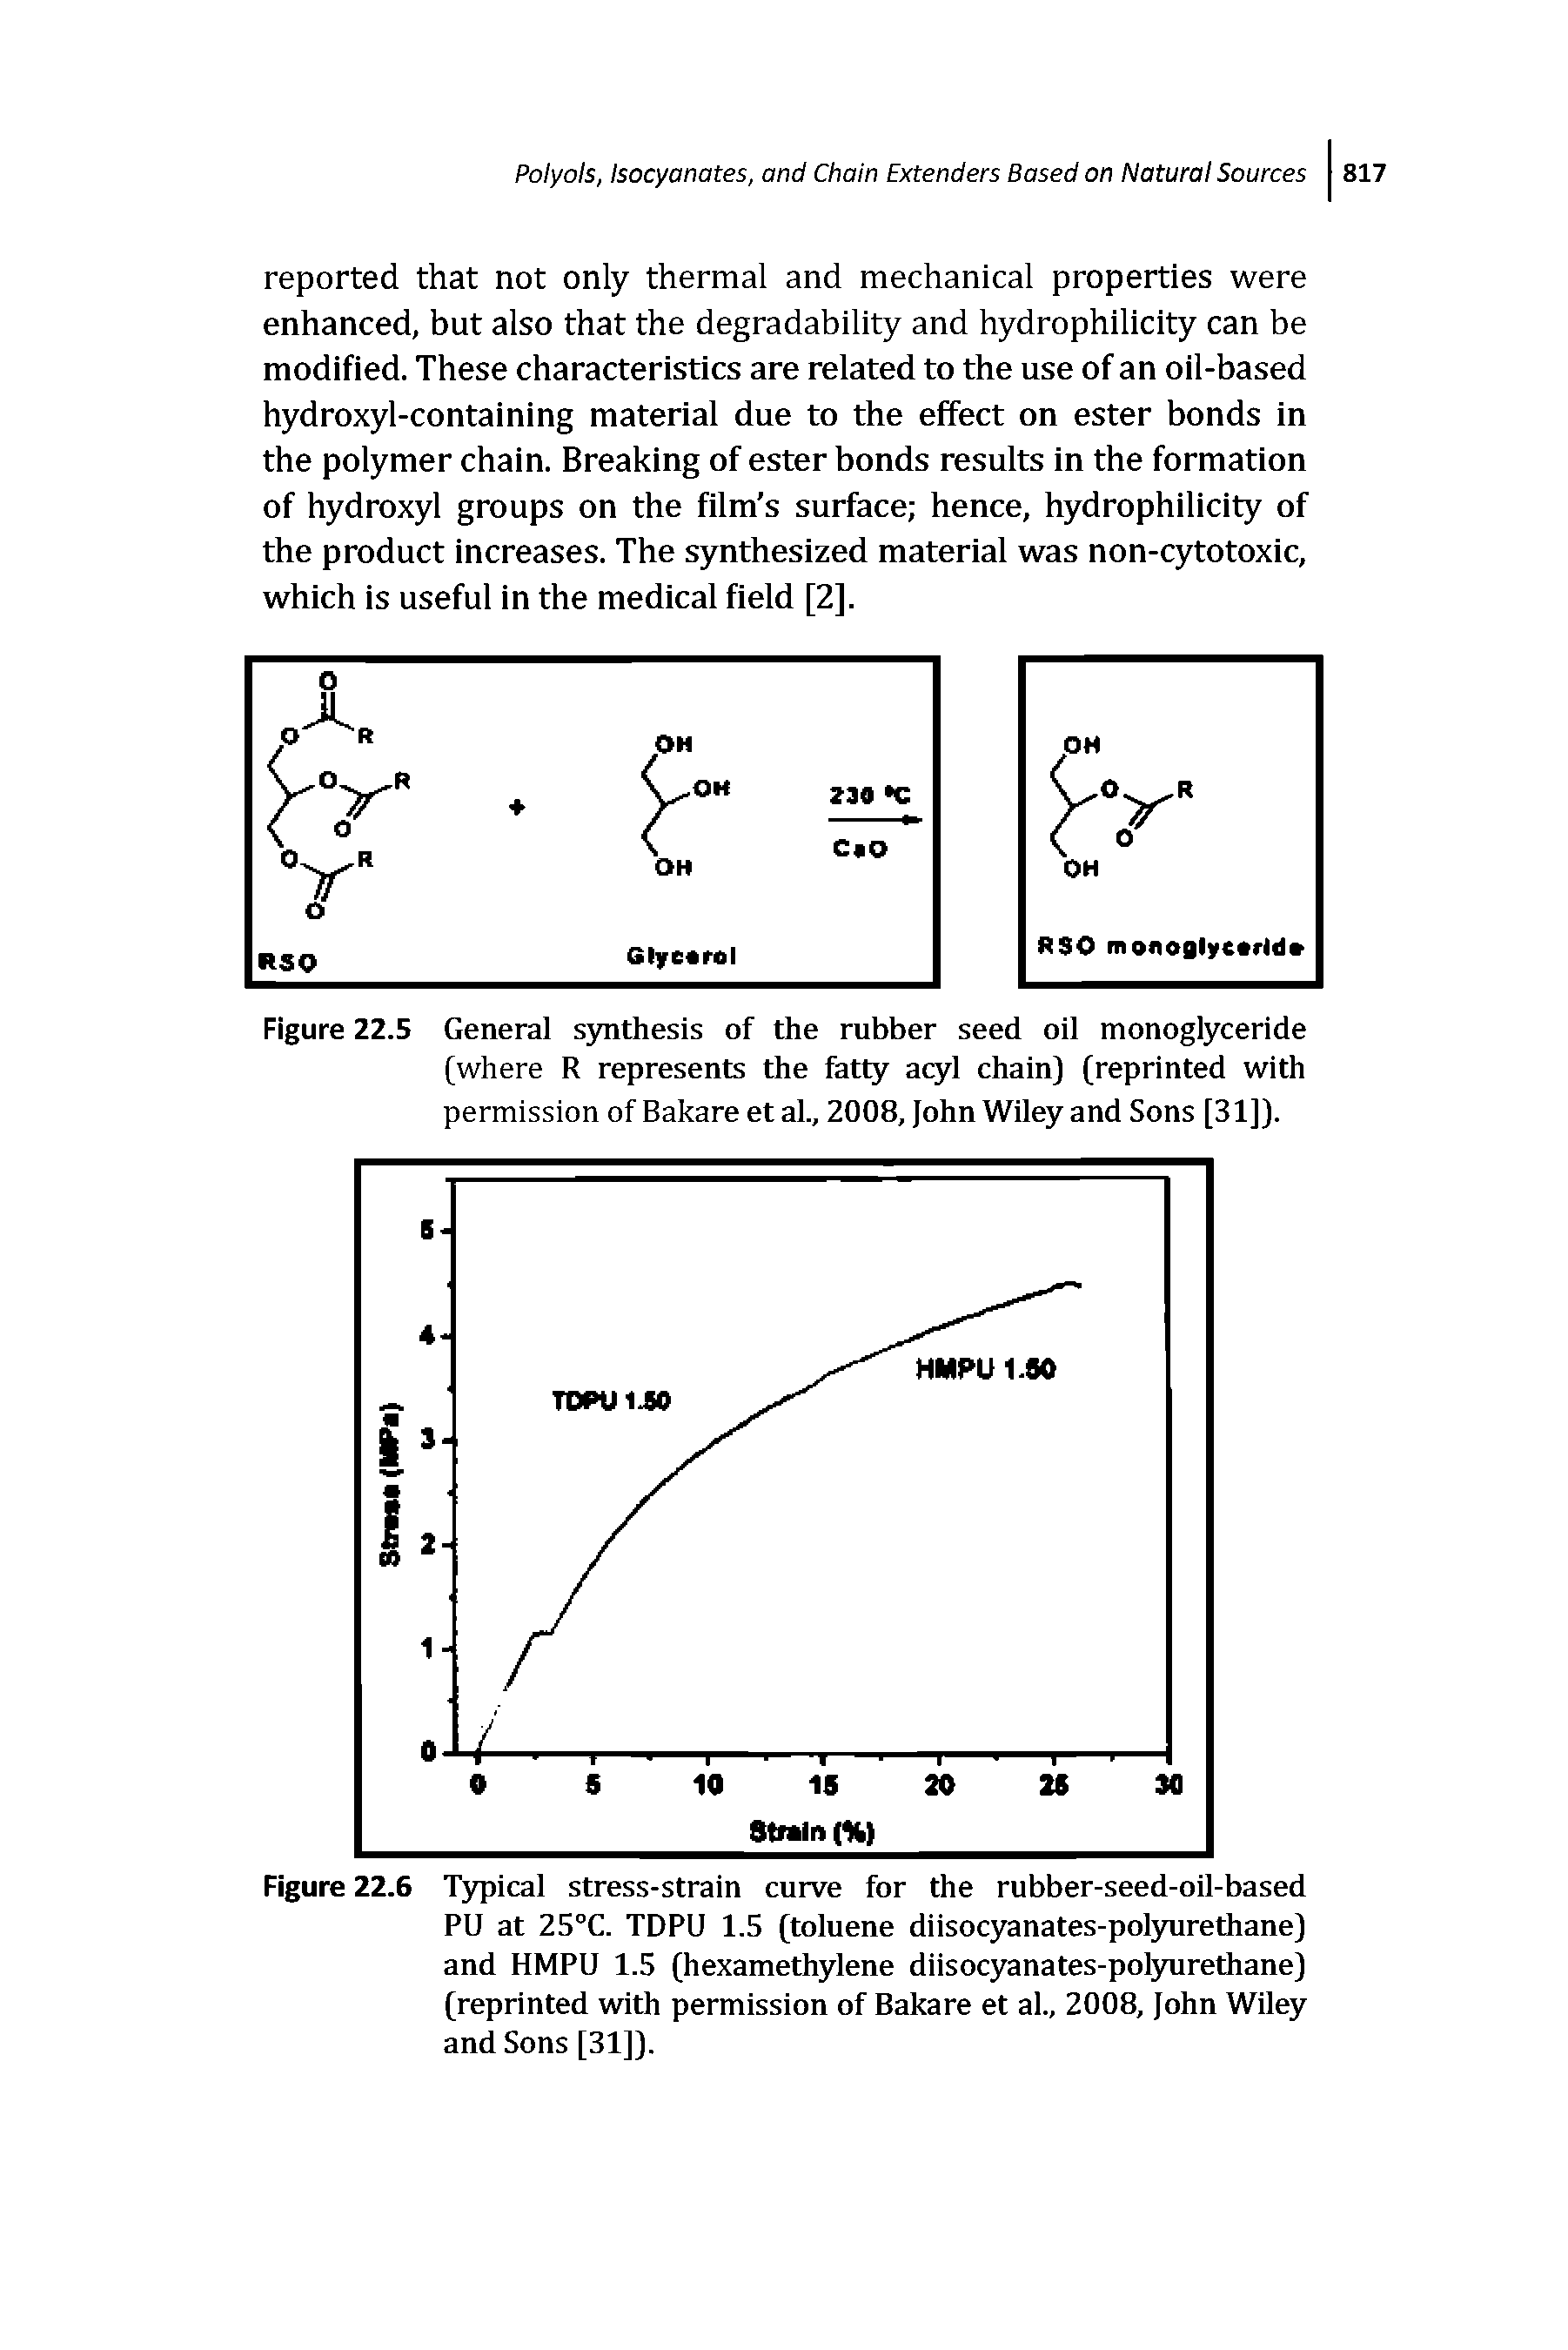 Figure 22.5 General synthesis of the rubber seed oil monoglyceride (where R represents the fatty acyl chain] (reprinted with permission of Bakare etal., 2008, John Wiley and Sons [31]).